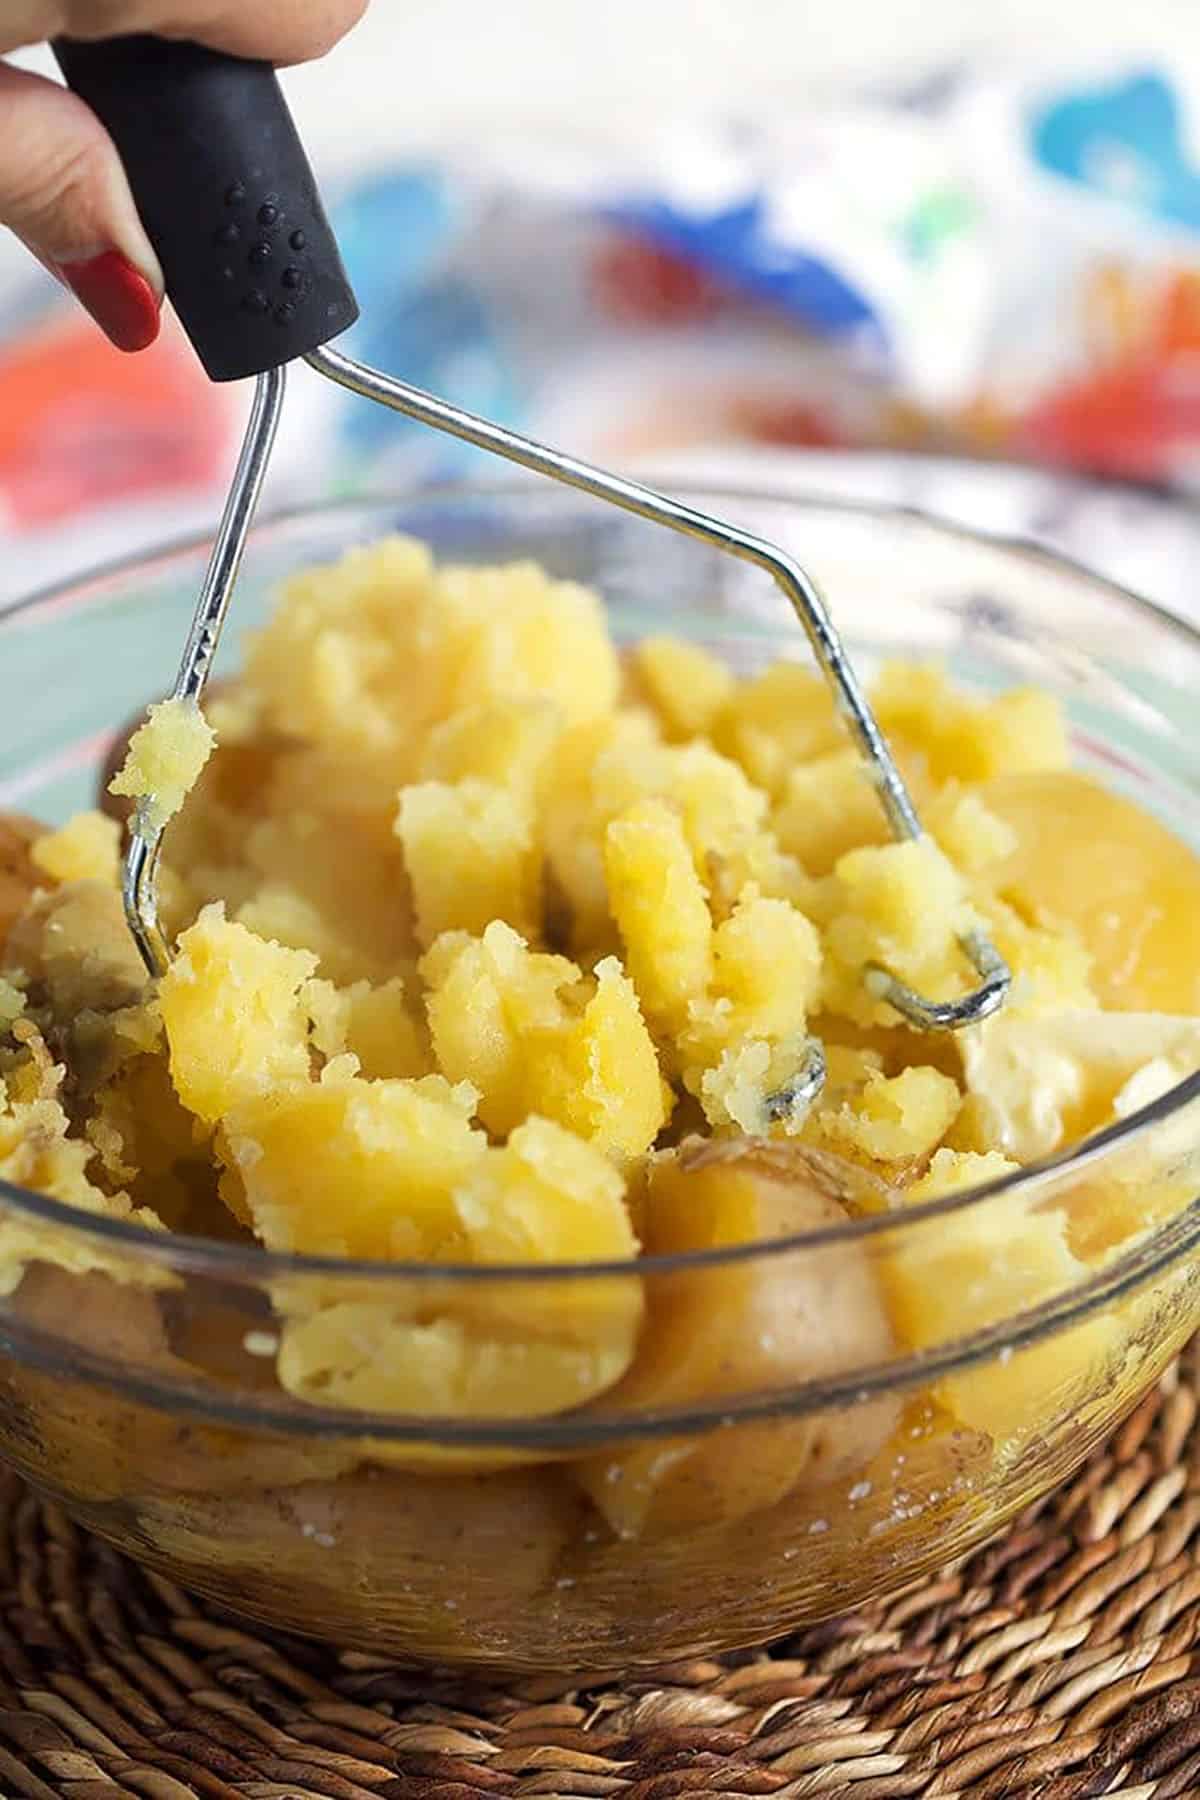 Potatoes being mashed with a potato masher in a glass bowl